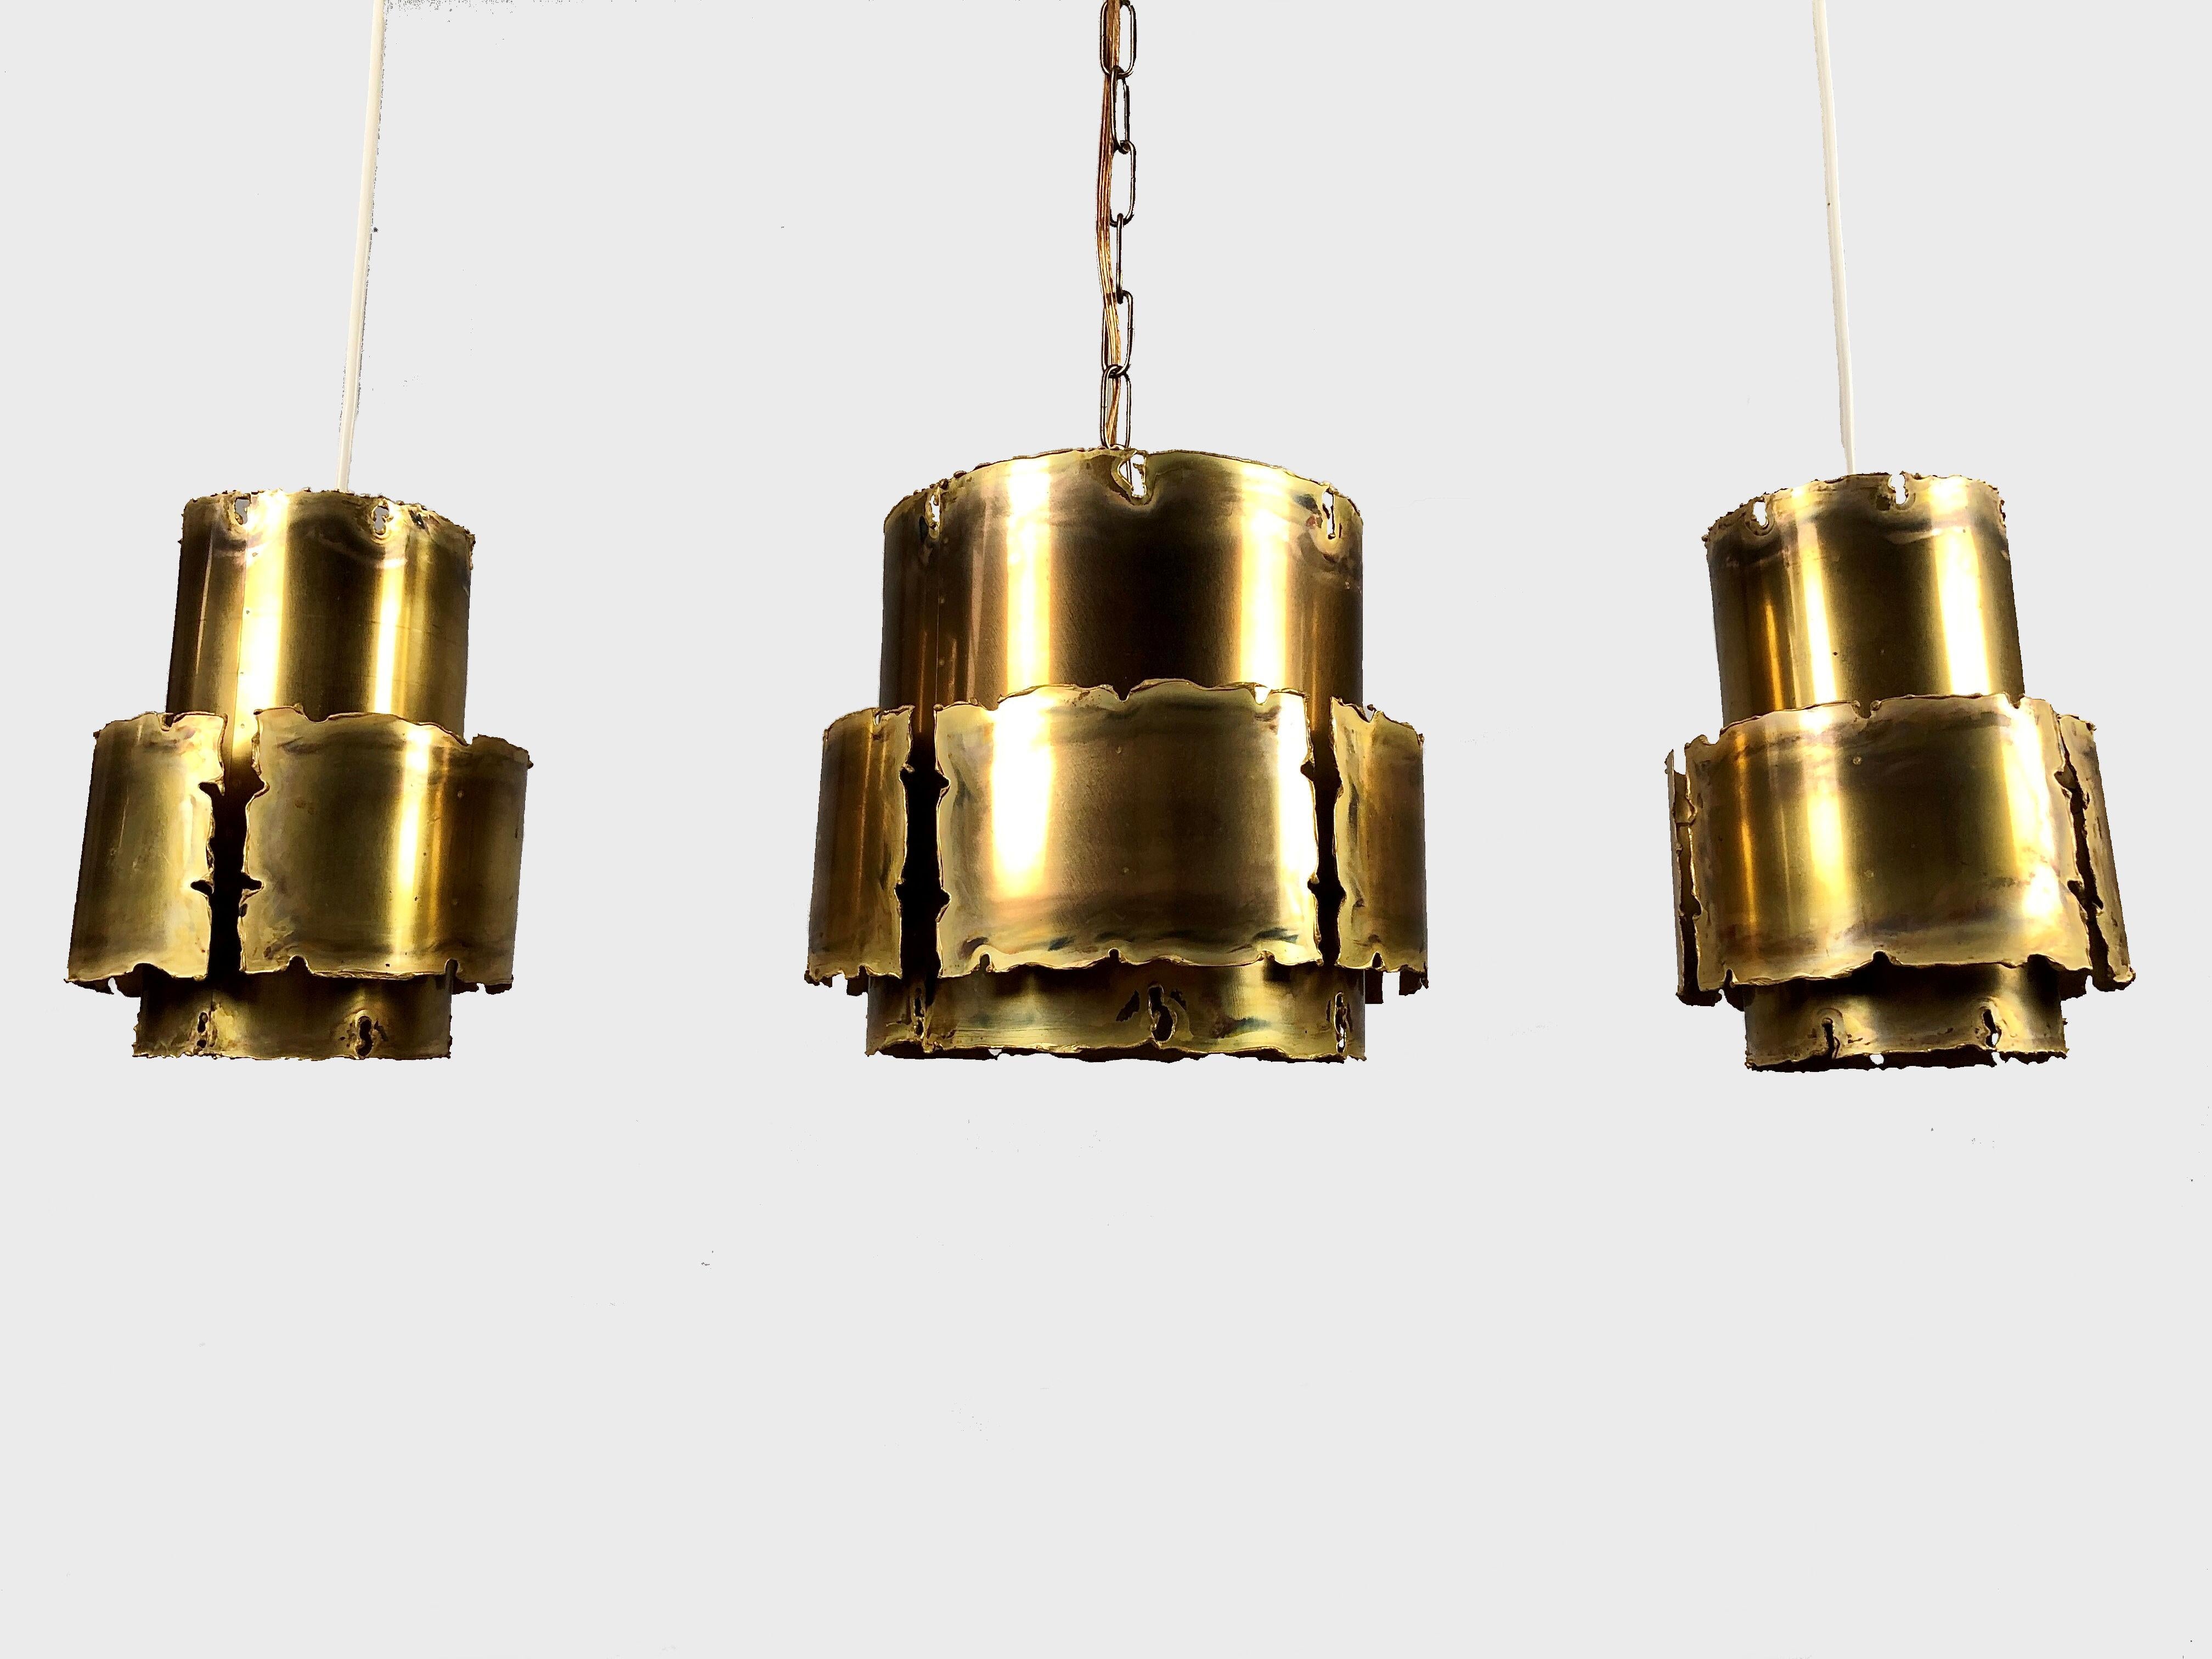 1960´s Set of Three Brutalist style pendants by Svend Aage Holm Sorensen

The acid treated and torch-cut pendants in brass manufactured by Holm Sørensen in Denmark. 

The well keept pendants are in very good vintage condition with only minor signs